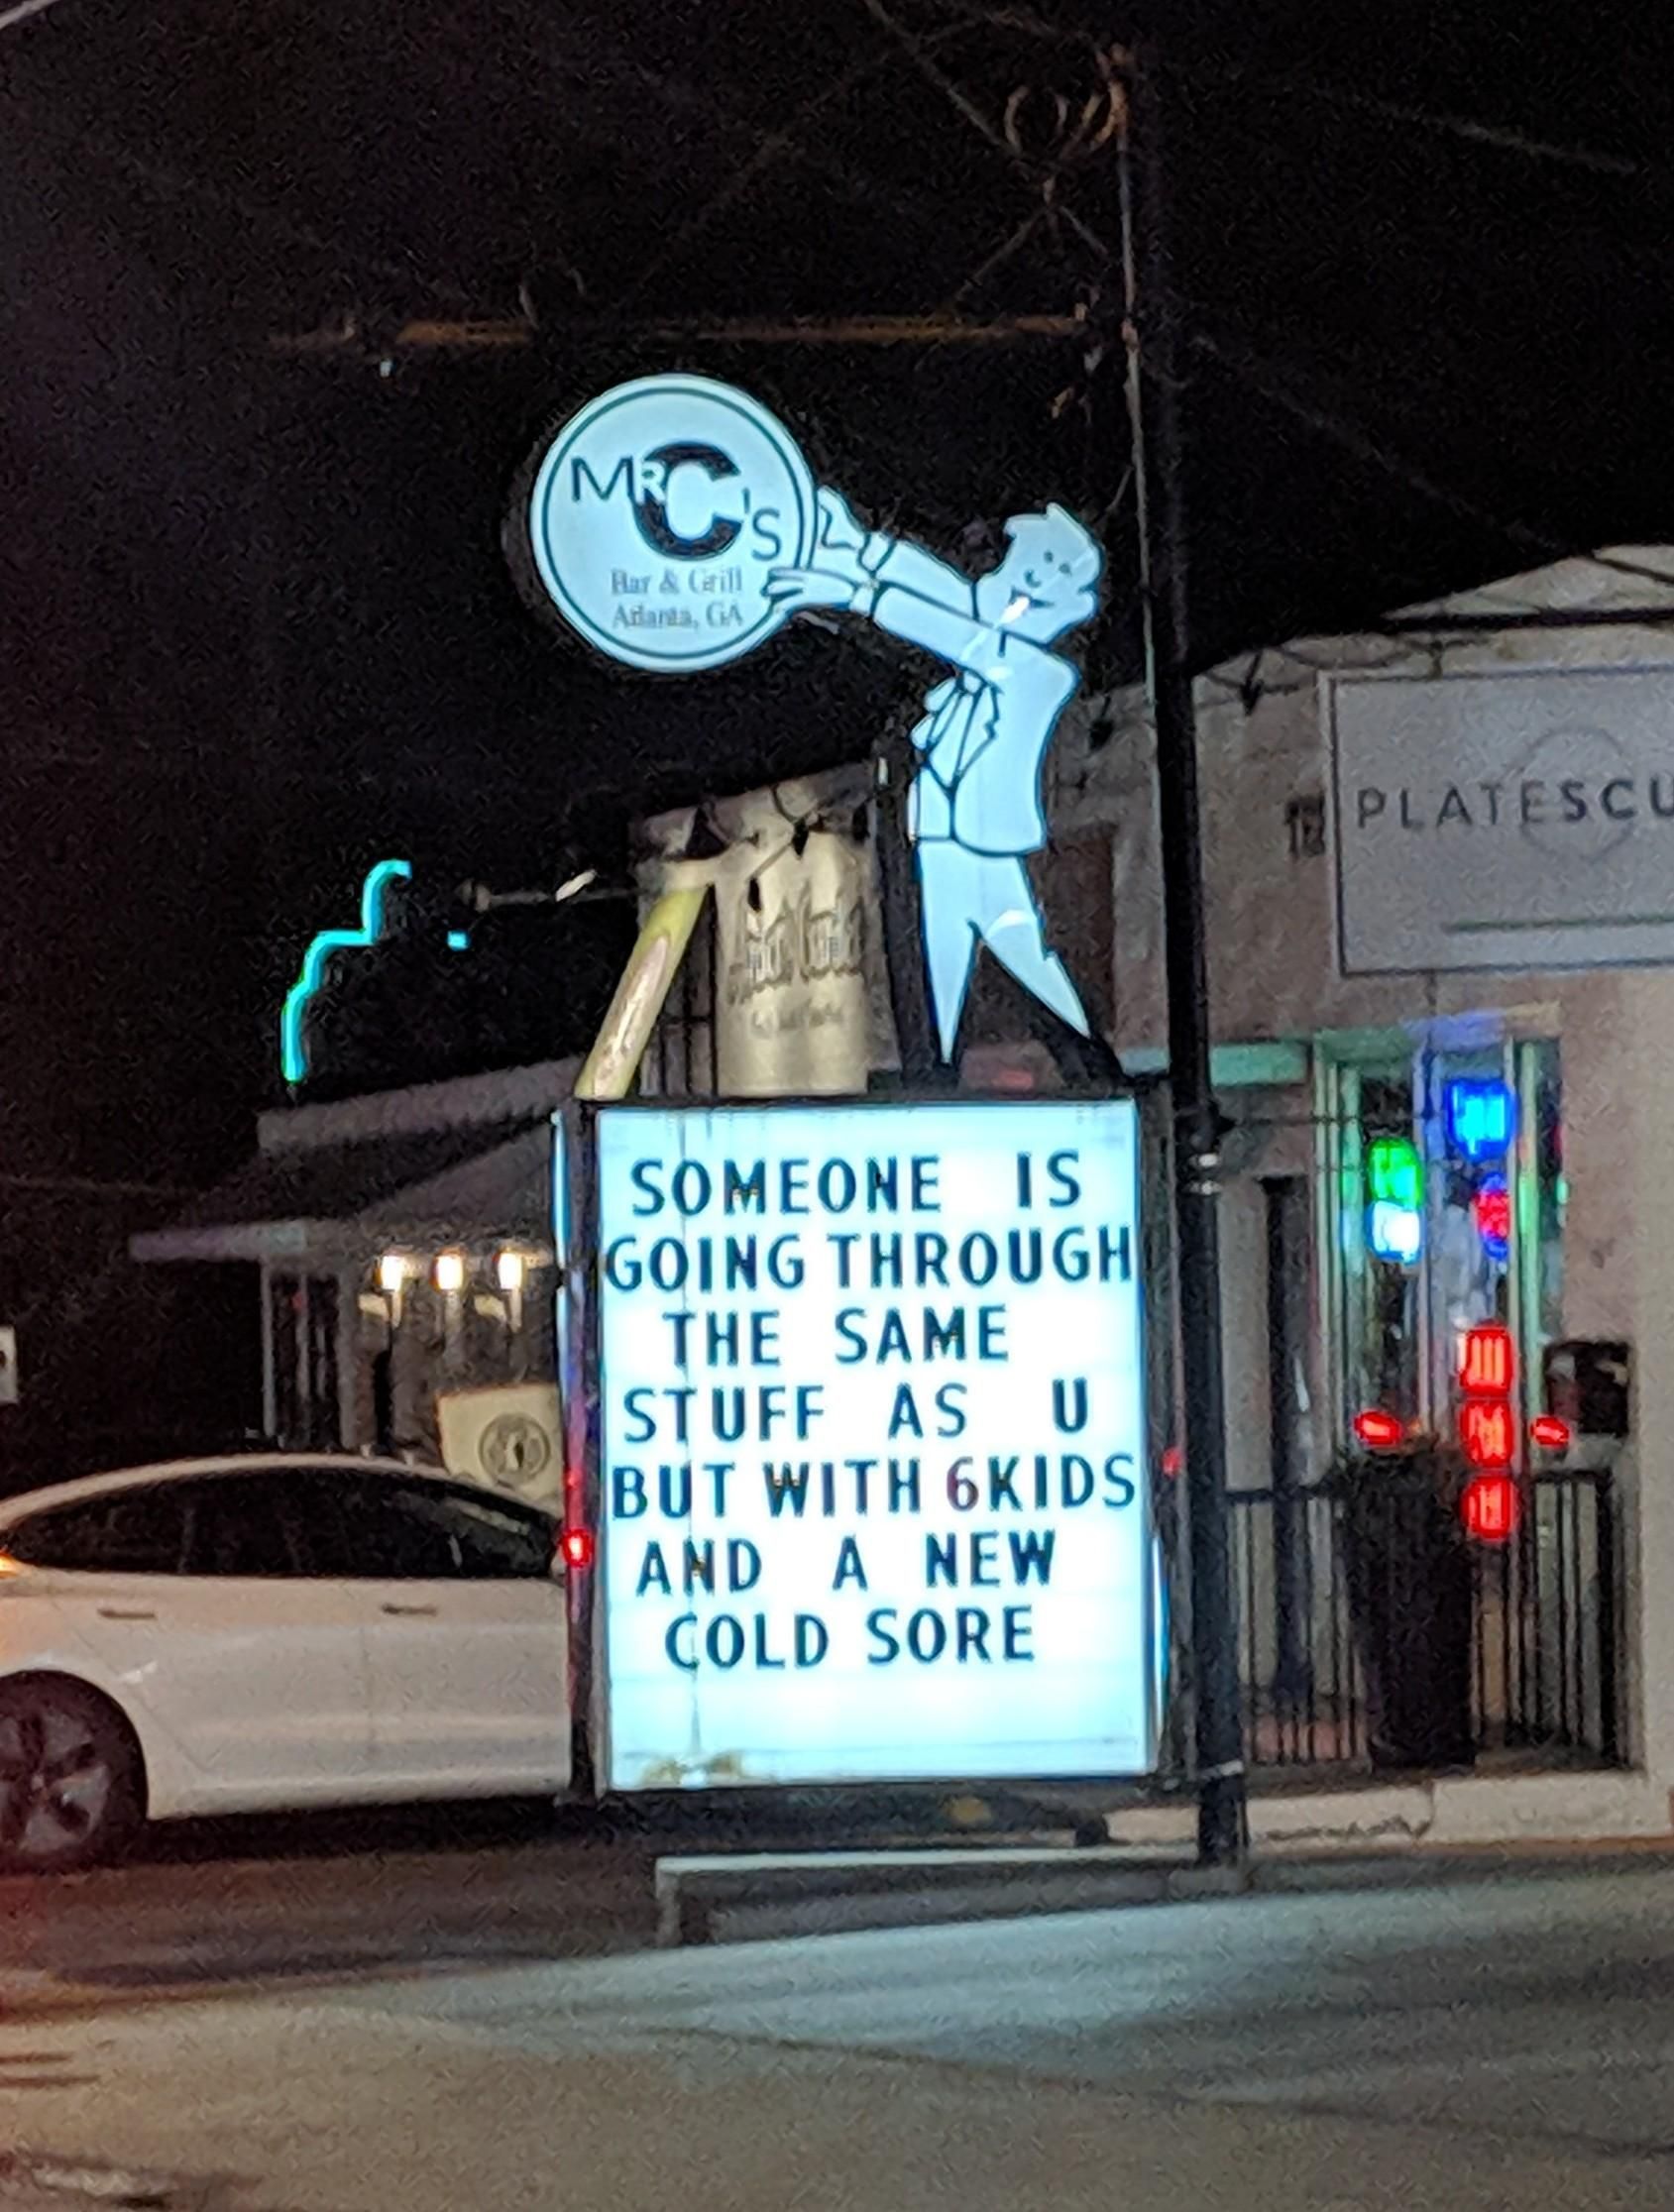 This bar sign puts things into perspective.